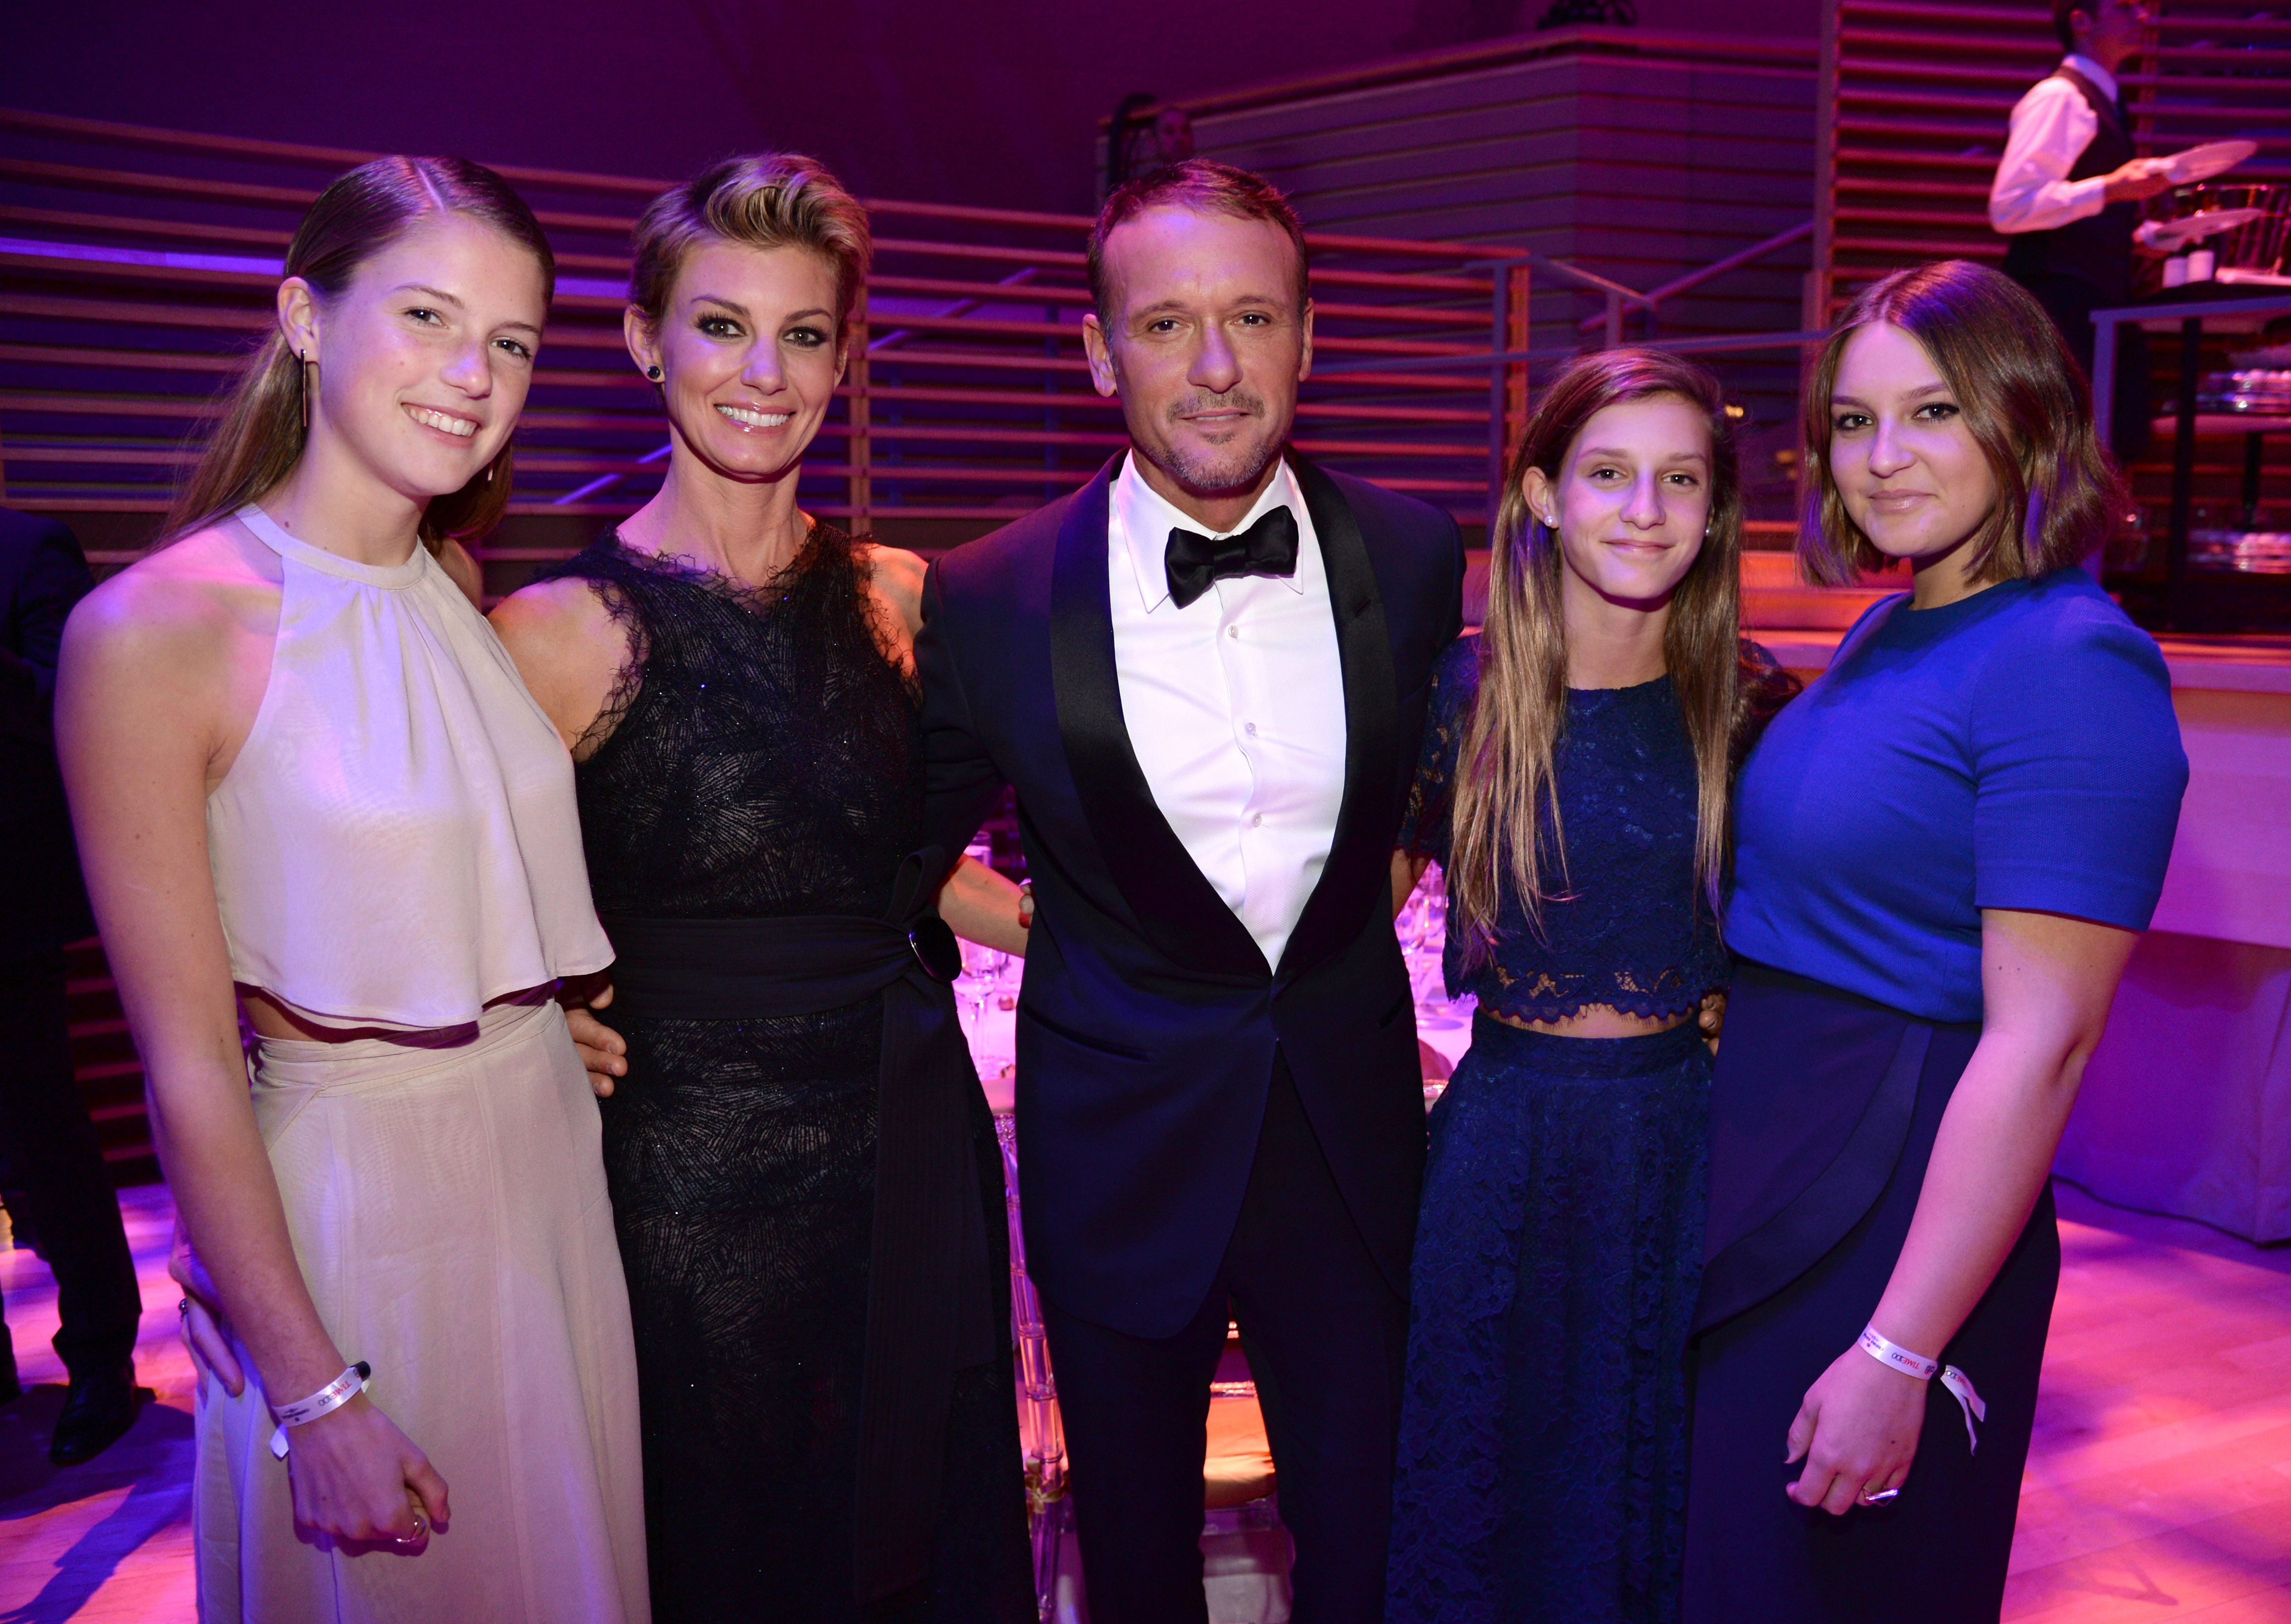 Gracie McGraw, Faith Hill, Tim McGraw, Audrey McGraw, and Maggie McGraw attend TIME 100 Gala, TIME's 100 Most Influential People In The World in New York on April 21, 2015. | Source: Getty Images